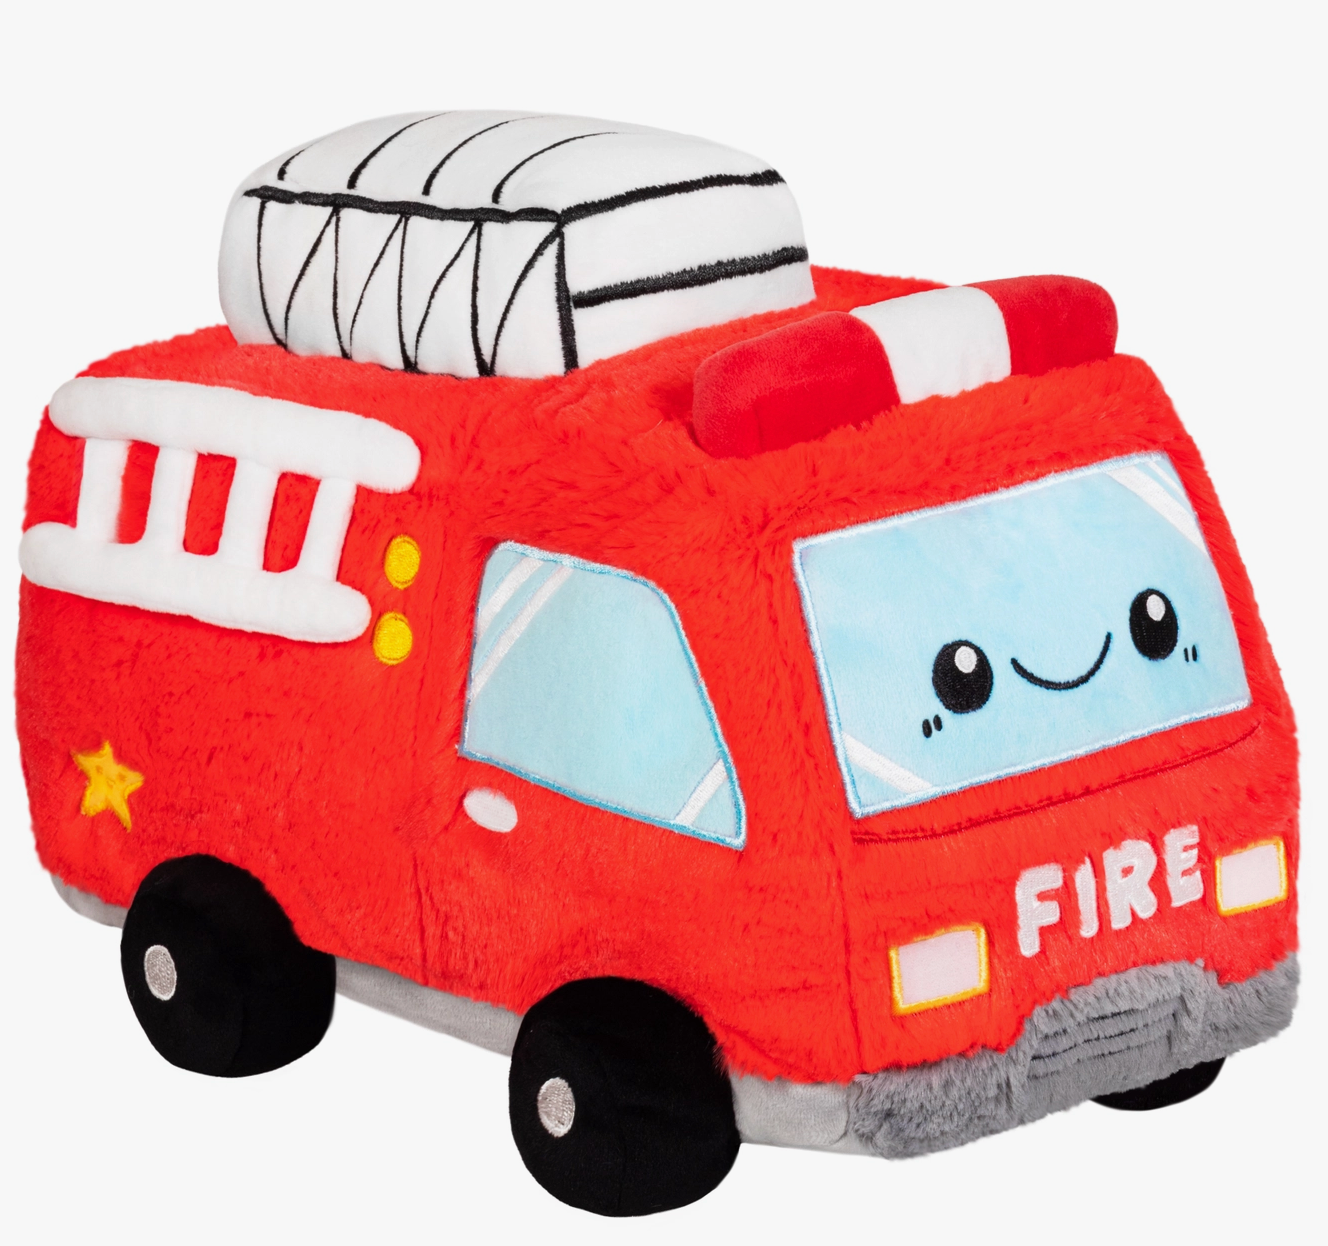 Go! Fire Truck - Squishable